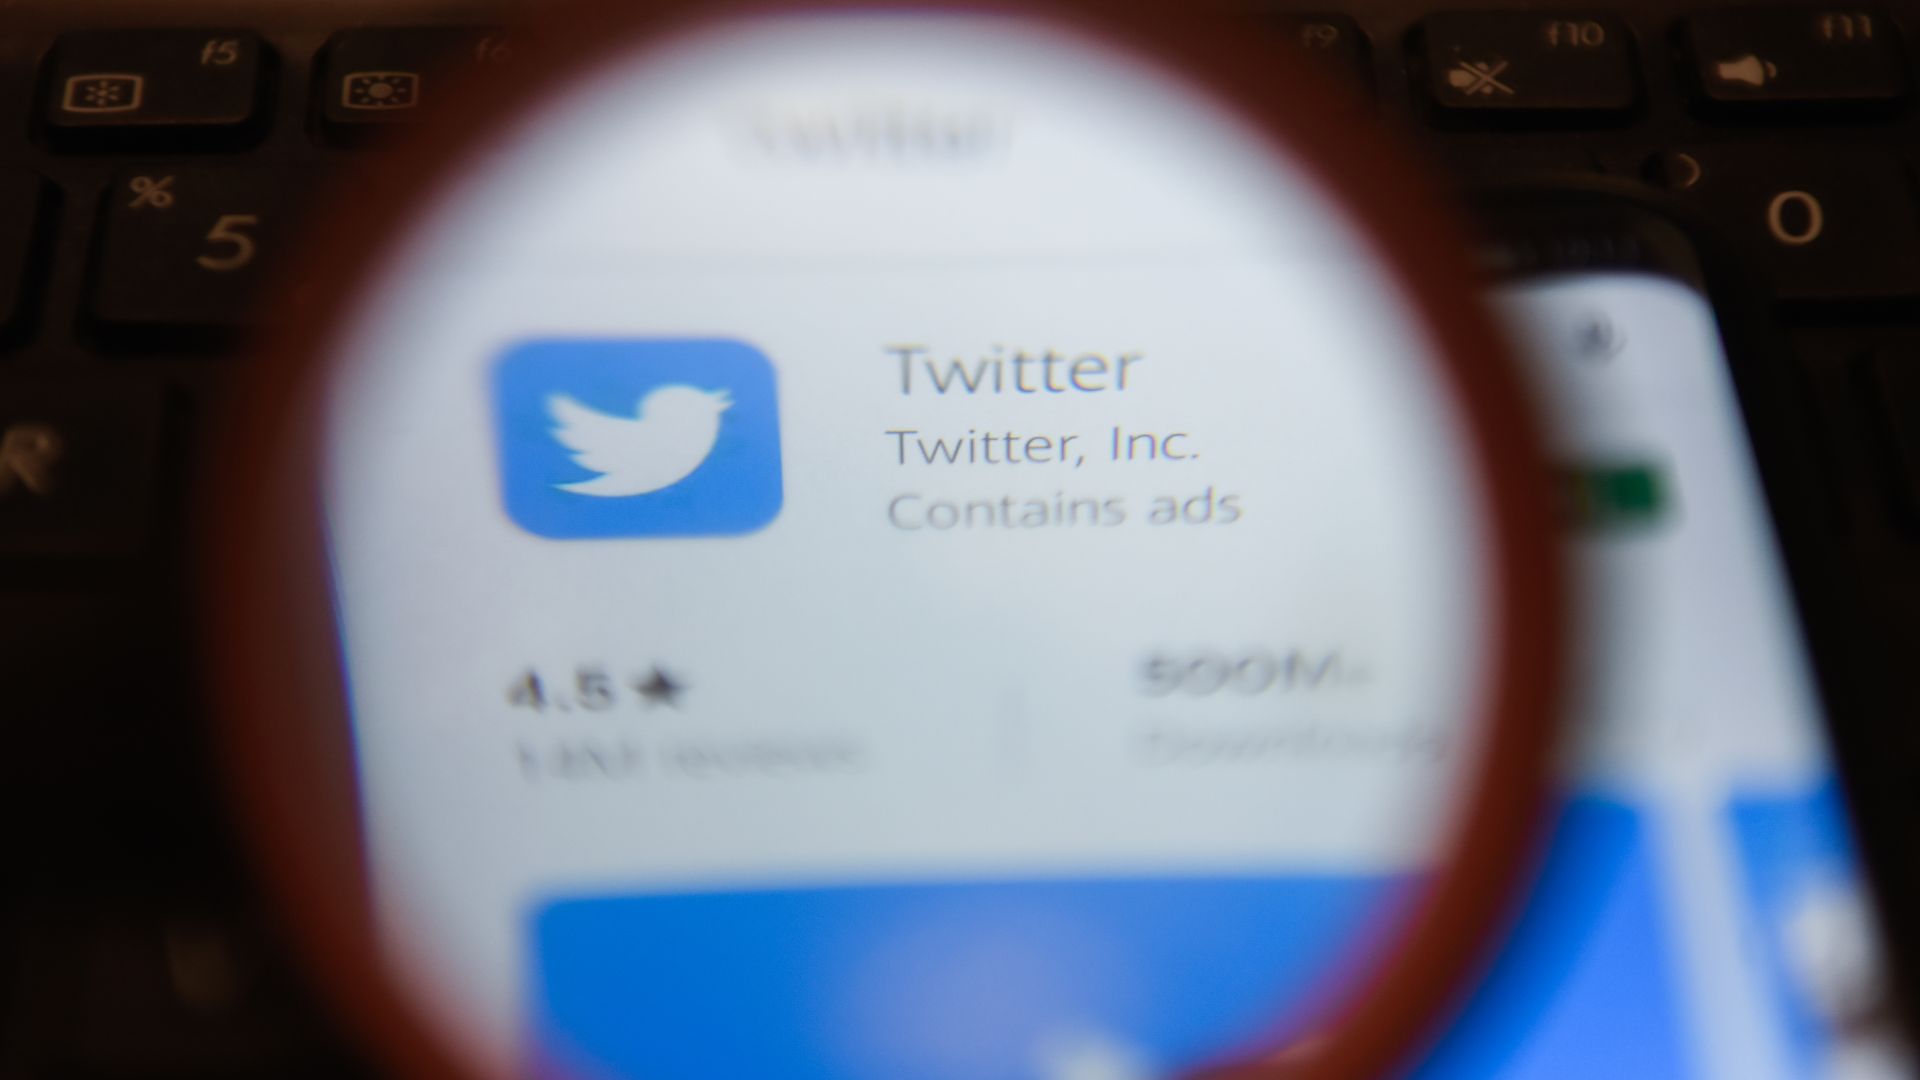 The Twitter logo appears under a magnifying glass.